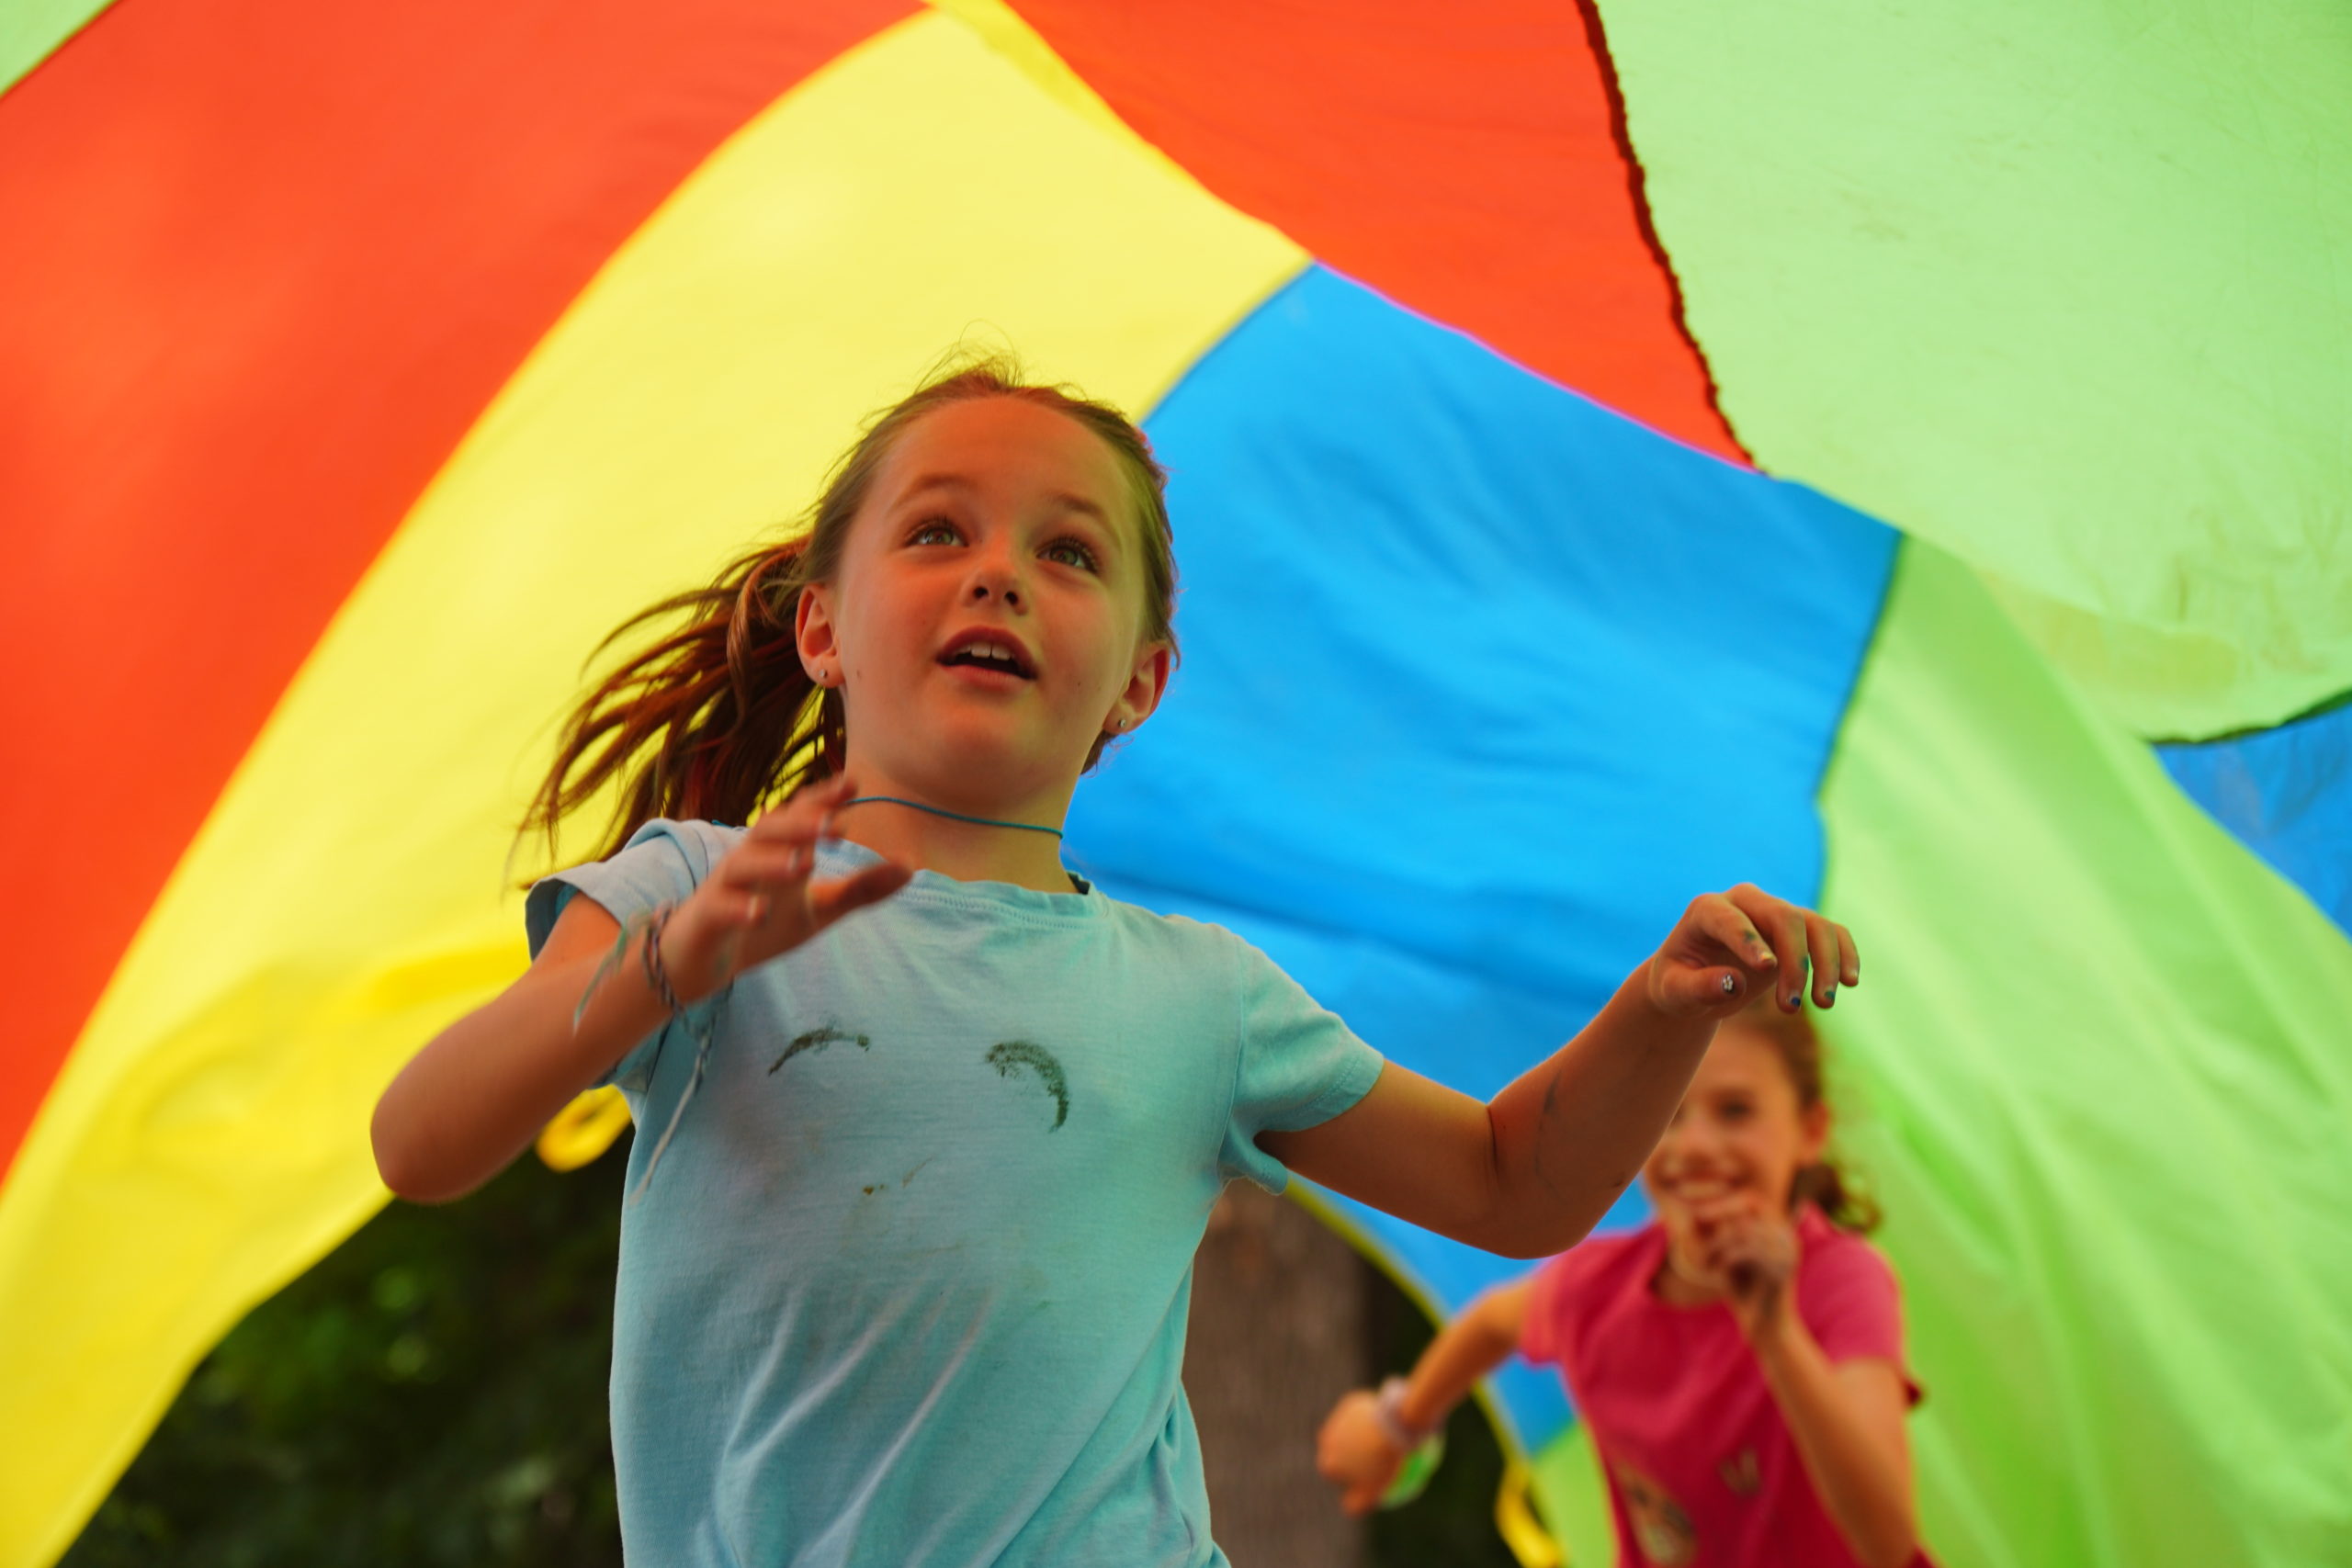 To children joyously running under a brightly colored parachute.